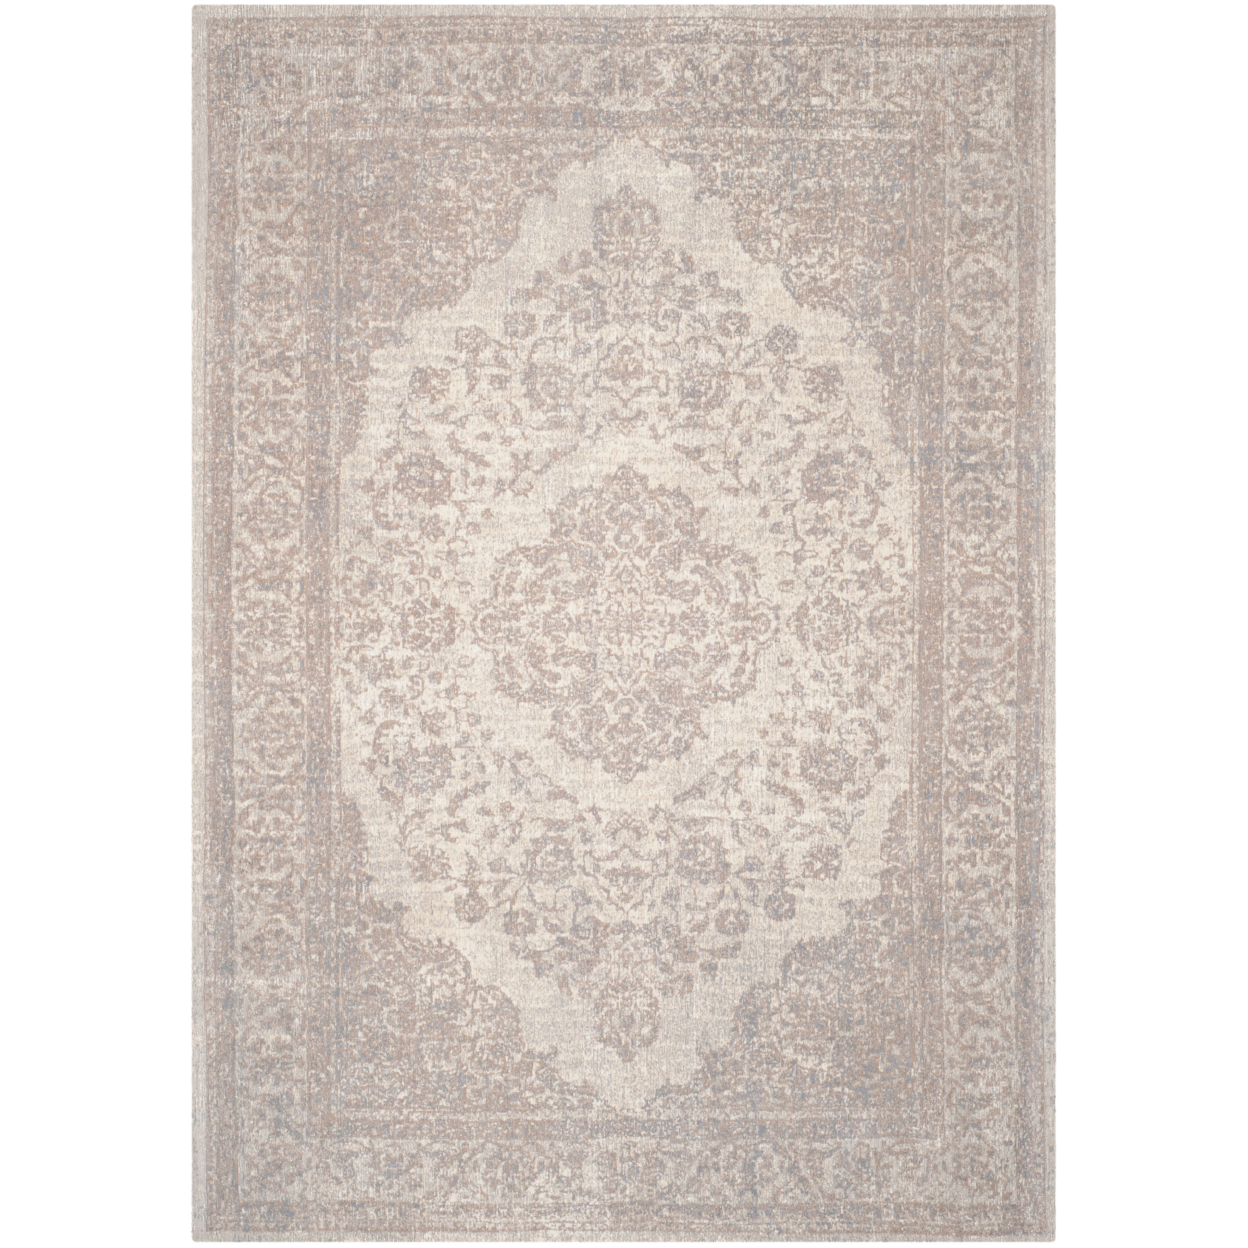 SAFAVIEH Classic Vintage Collection CLV121A Beige Rug - 8' X 10'